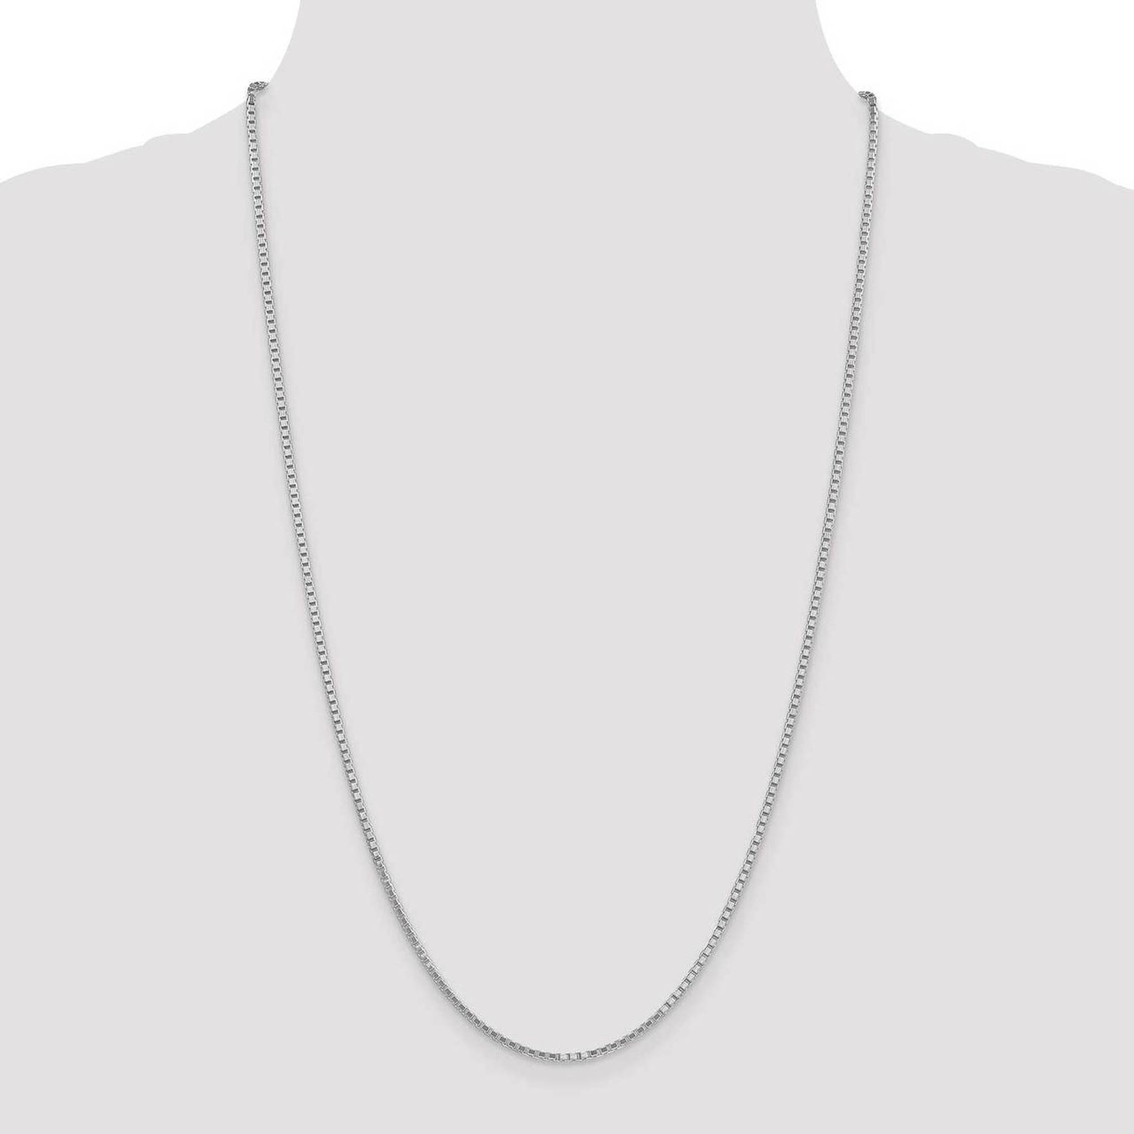 14K White Gold 1.9mm Box Chain Necklace - Image 5 of 5